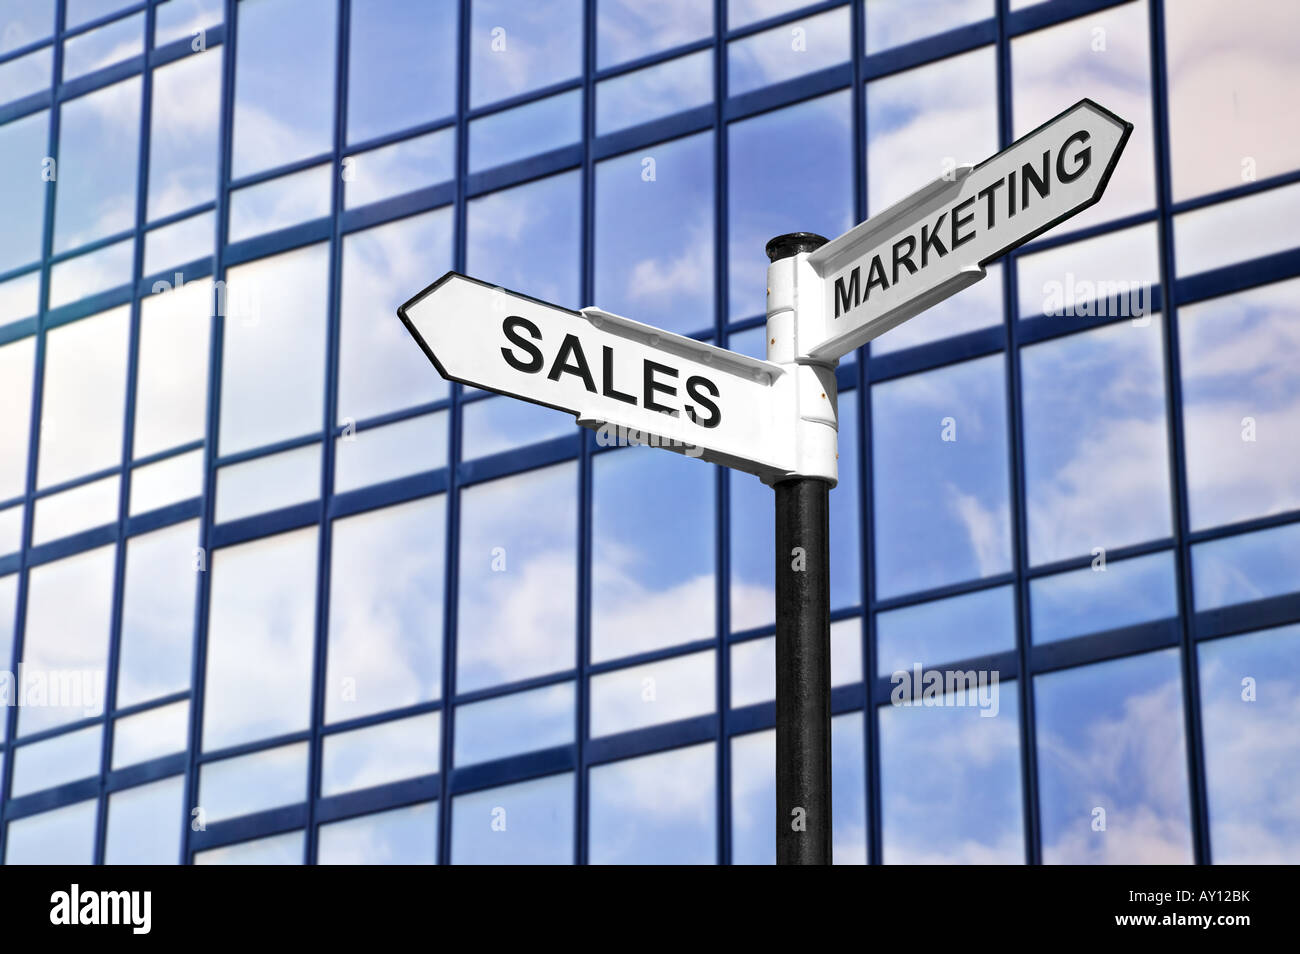 Concept image of Sales Marketing on a signpost against a modern glass office building Stock Photo